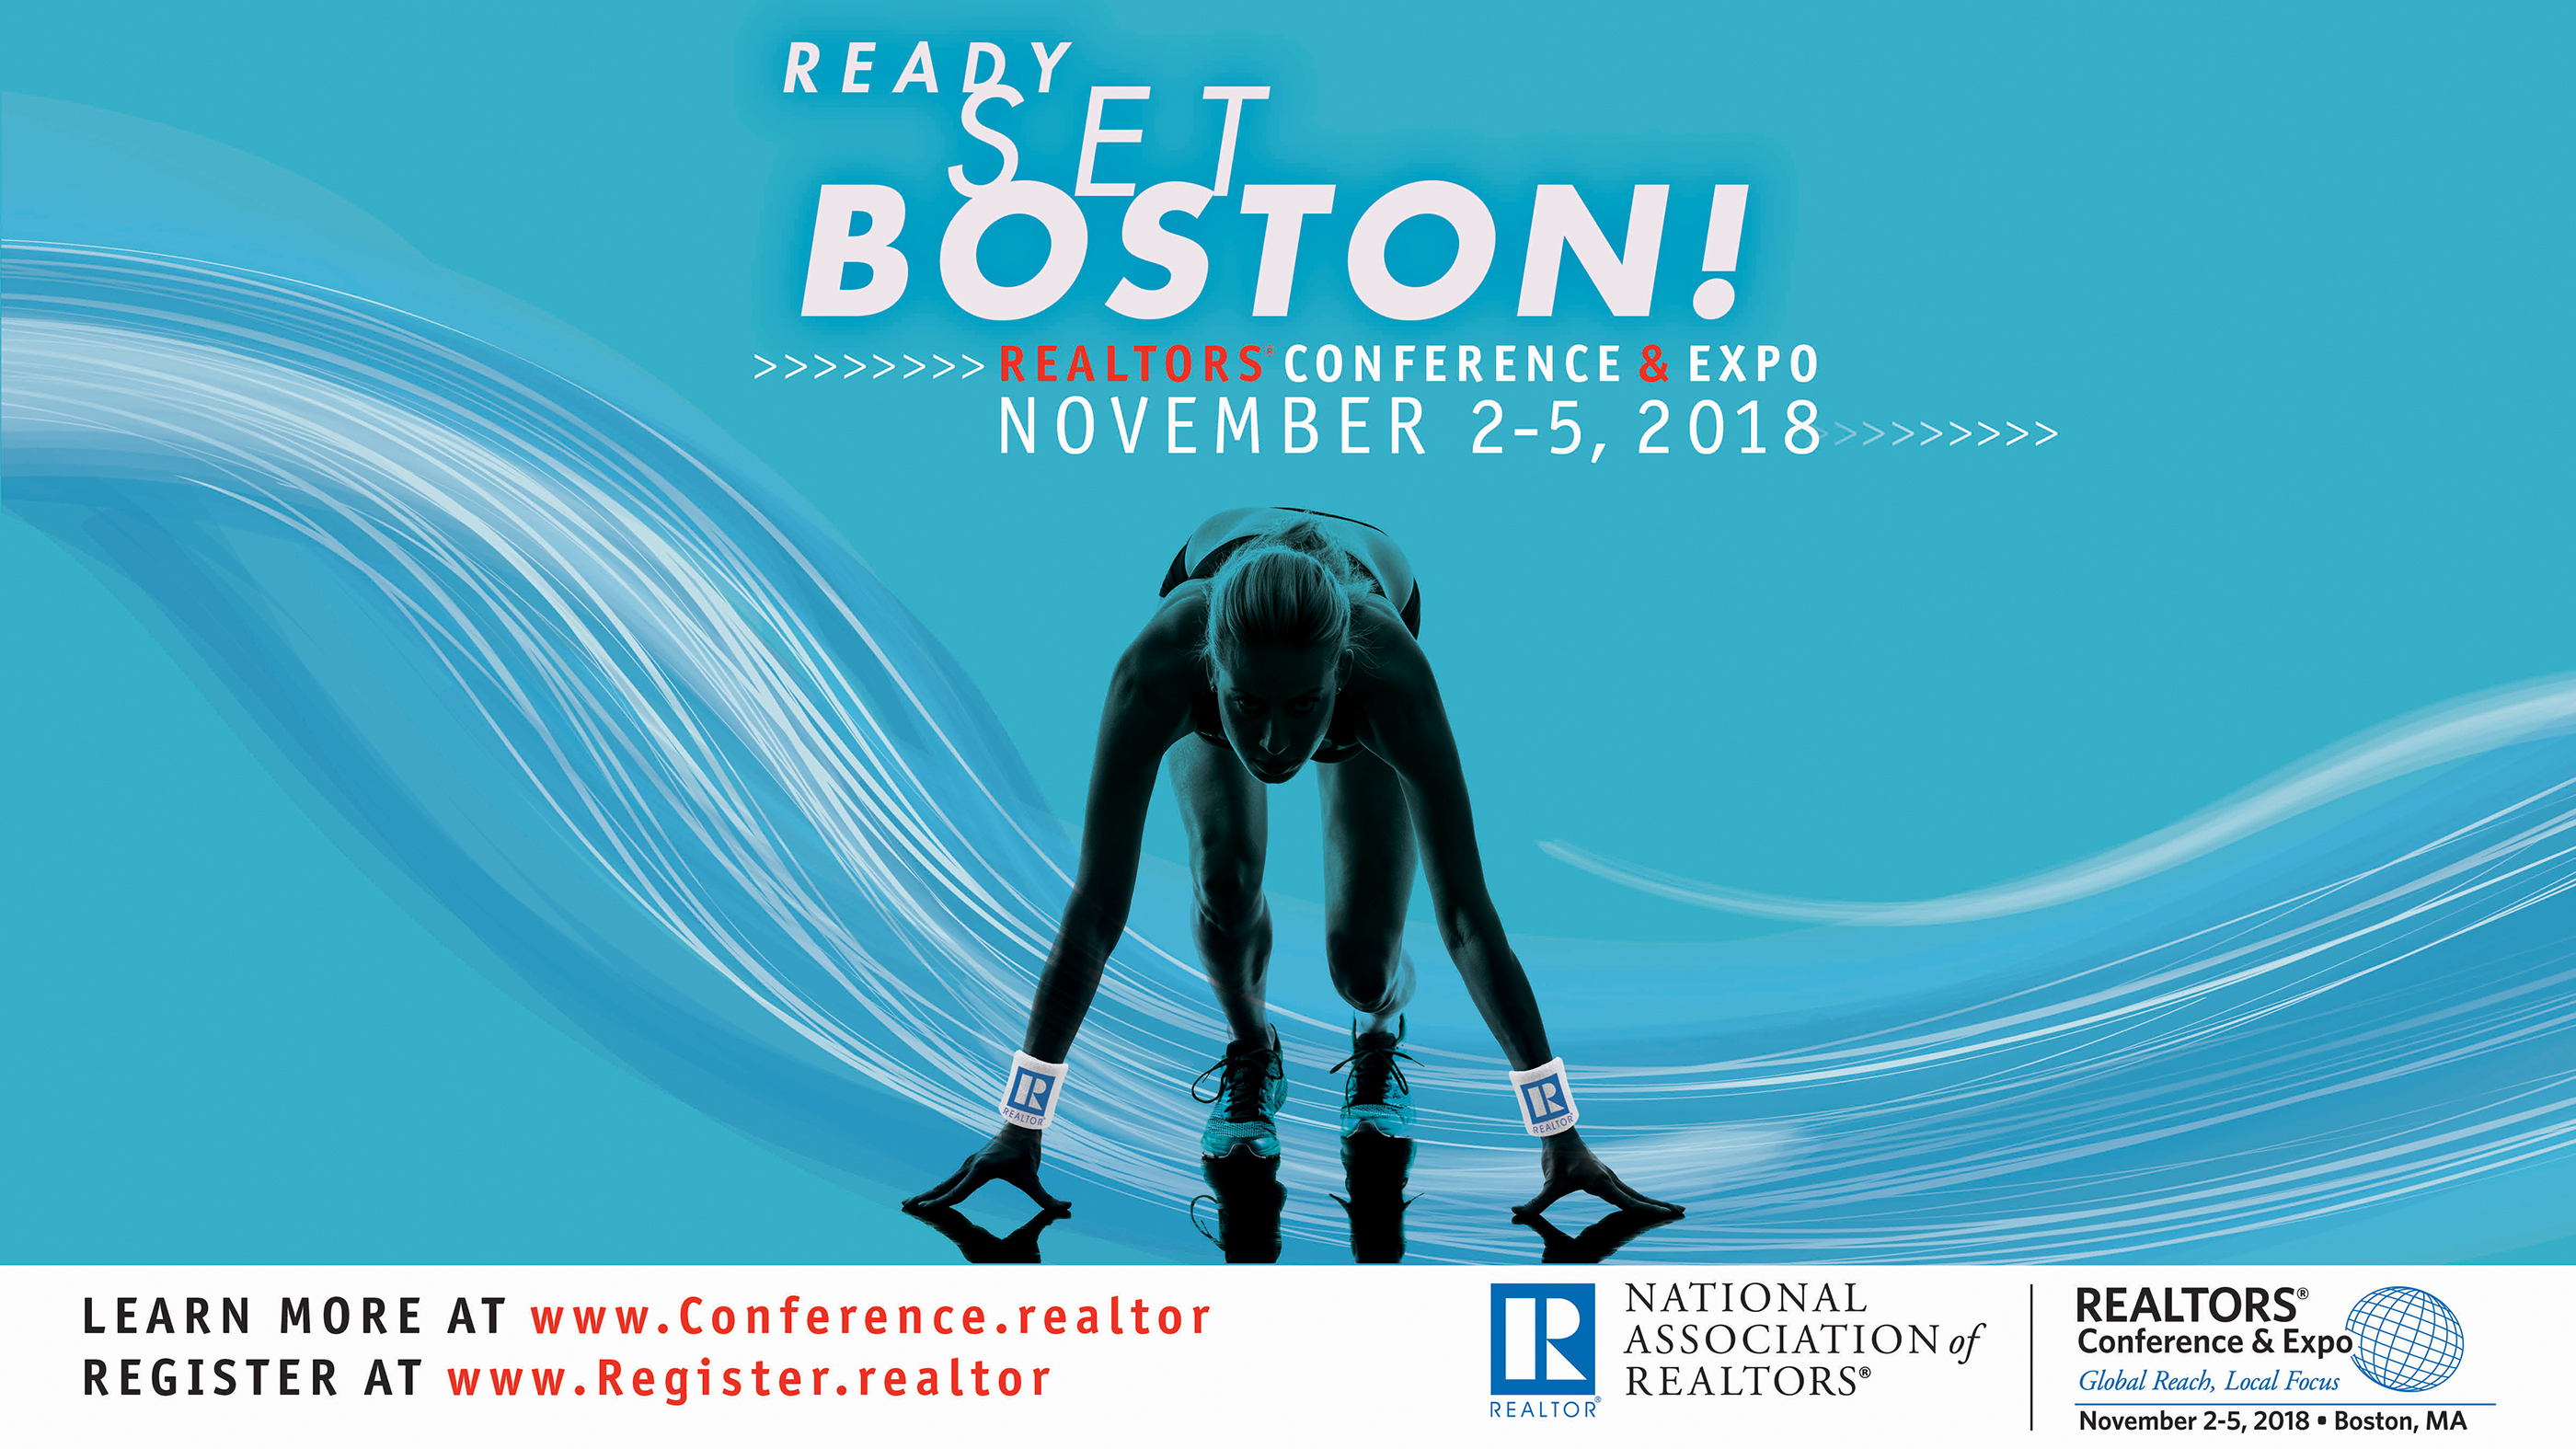 You are currently viewing Will You Be There? REALTORS® Conference & Expo in Boston